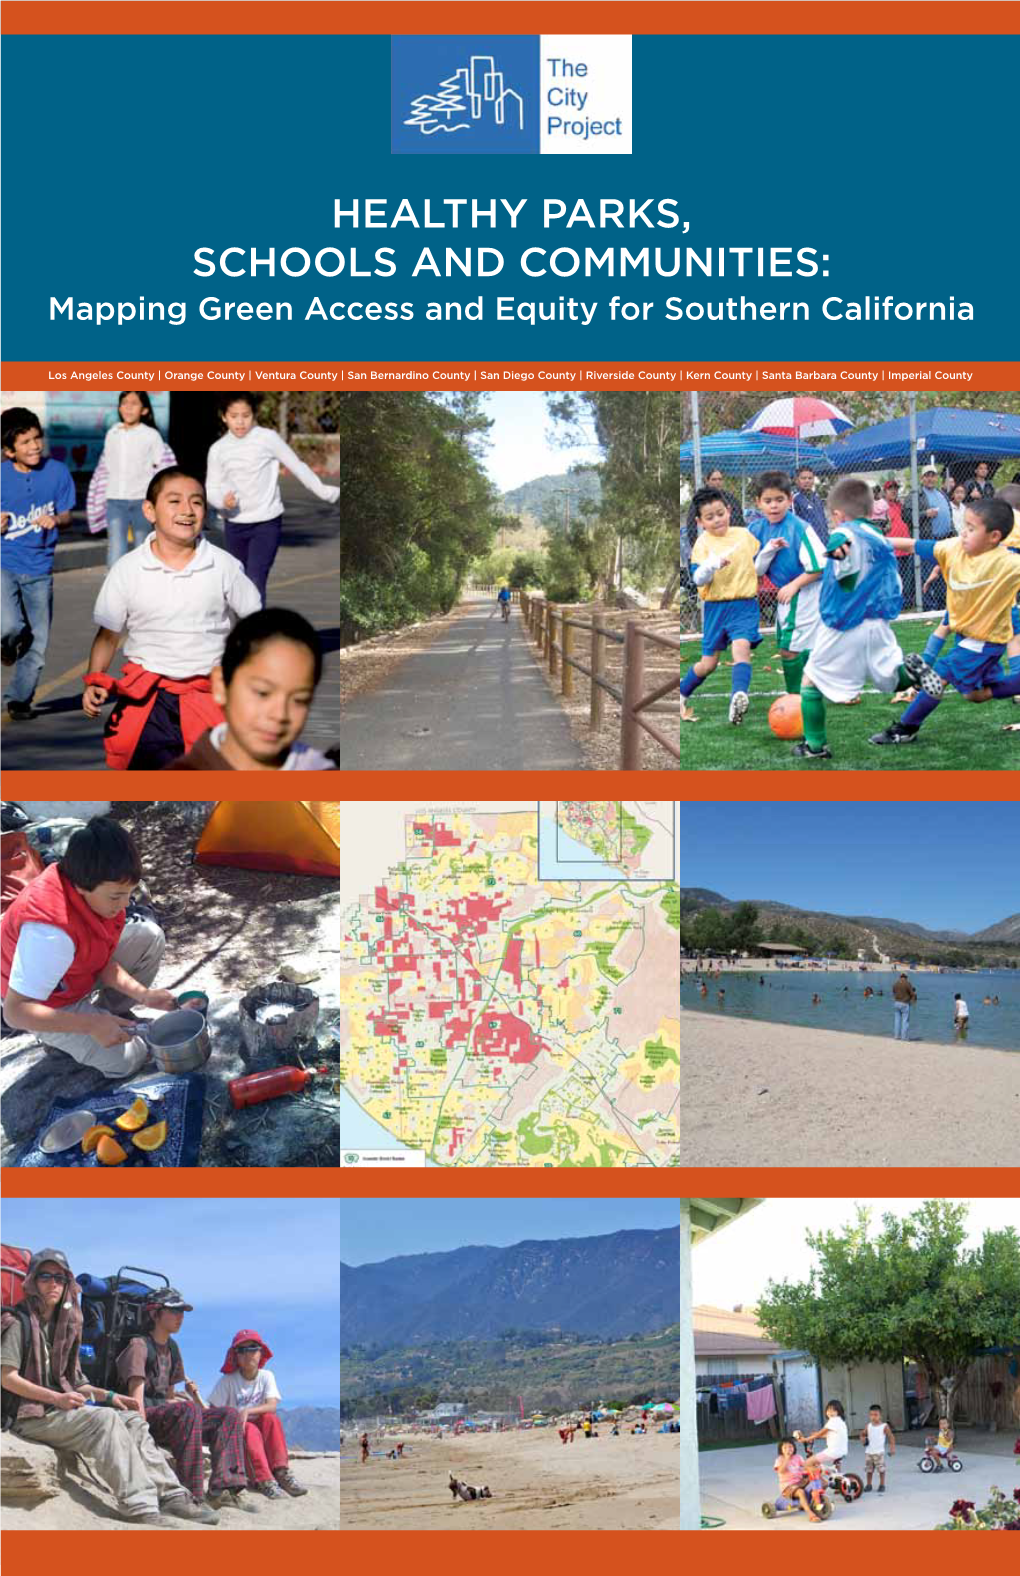 HEALTHY PARKS, SCHOOLS and COMMUNITIES: Mapping Green Access and Equity for Southern California